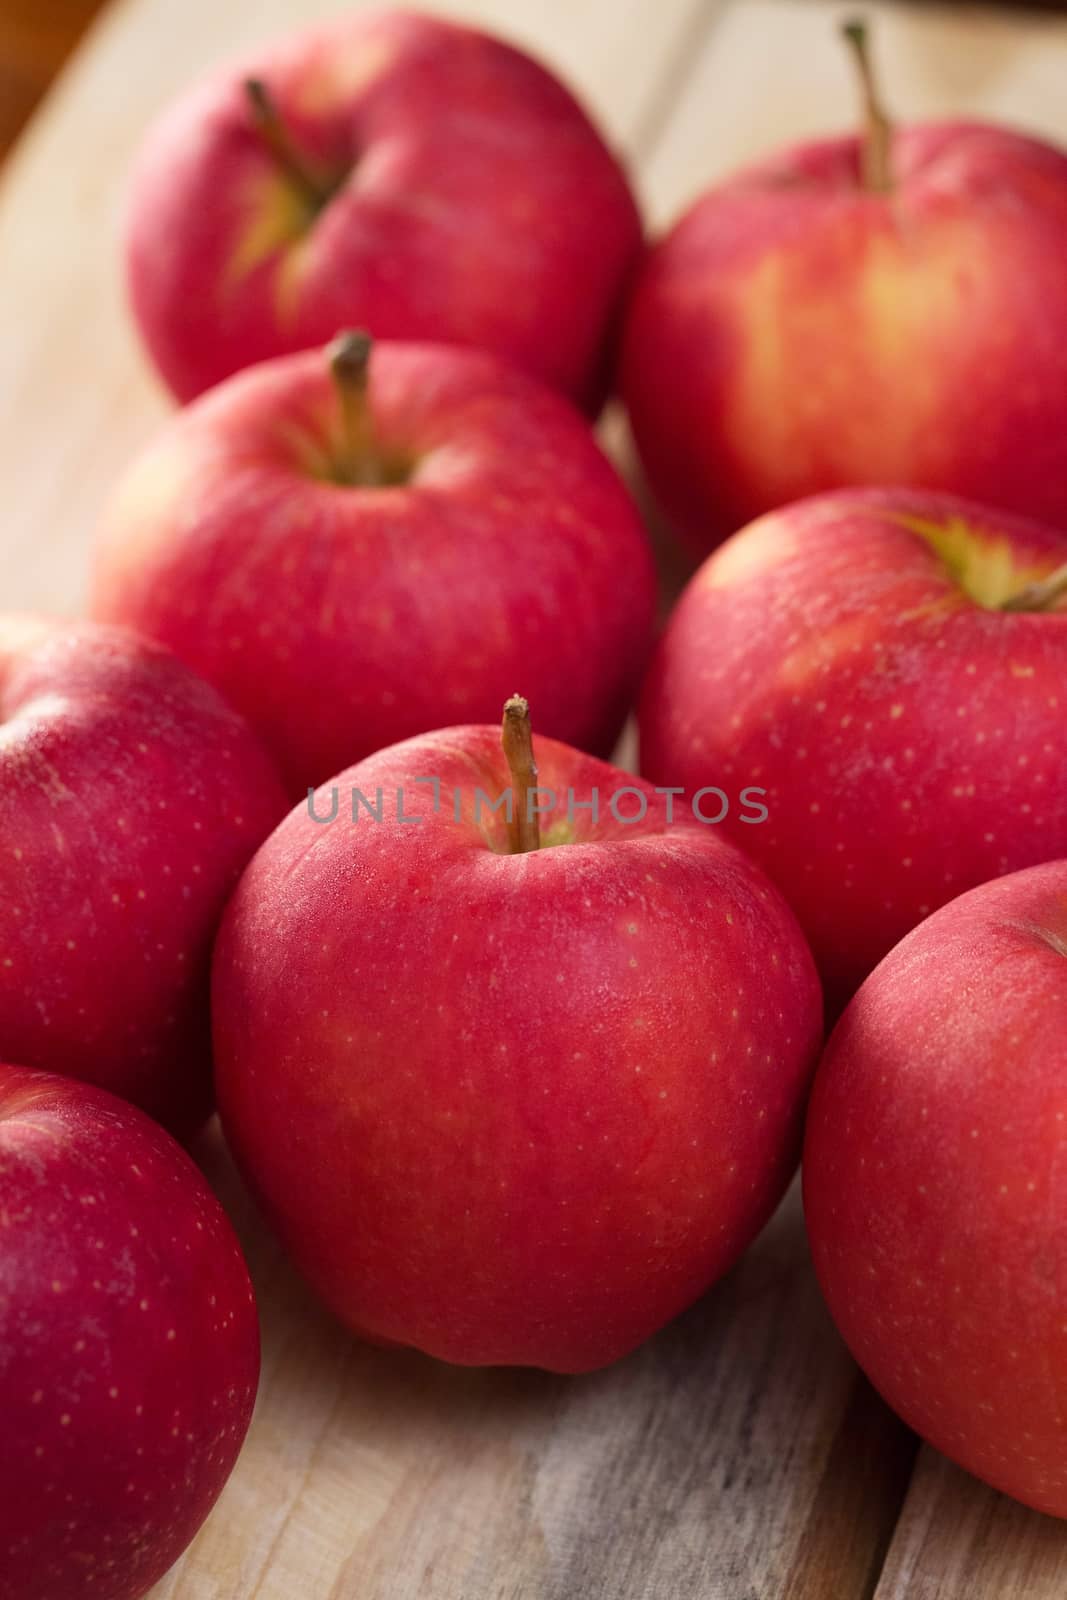 Group of red apples with fresh by boytaro1428@gmail.com